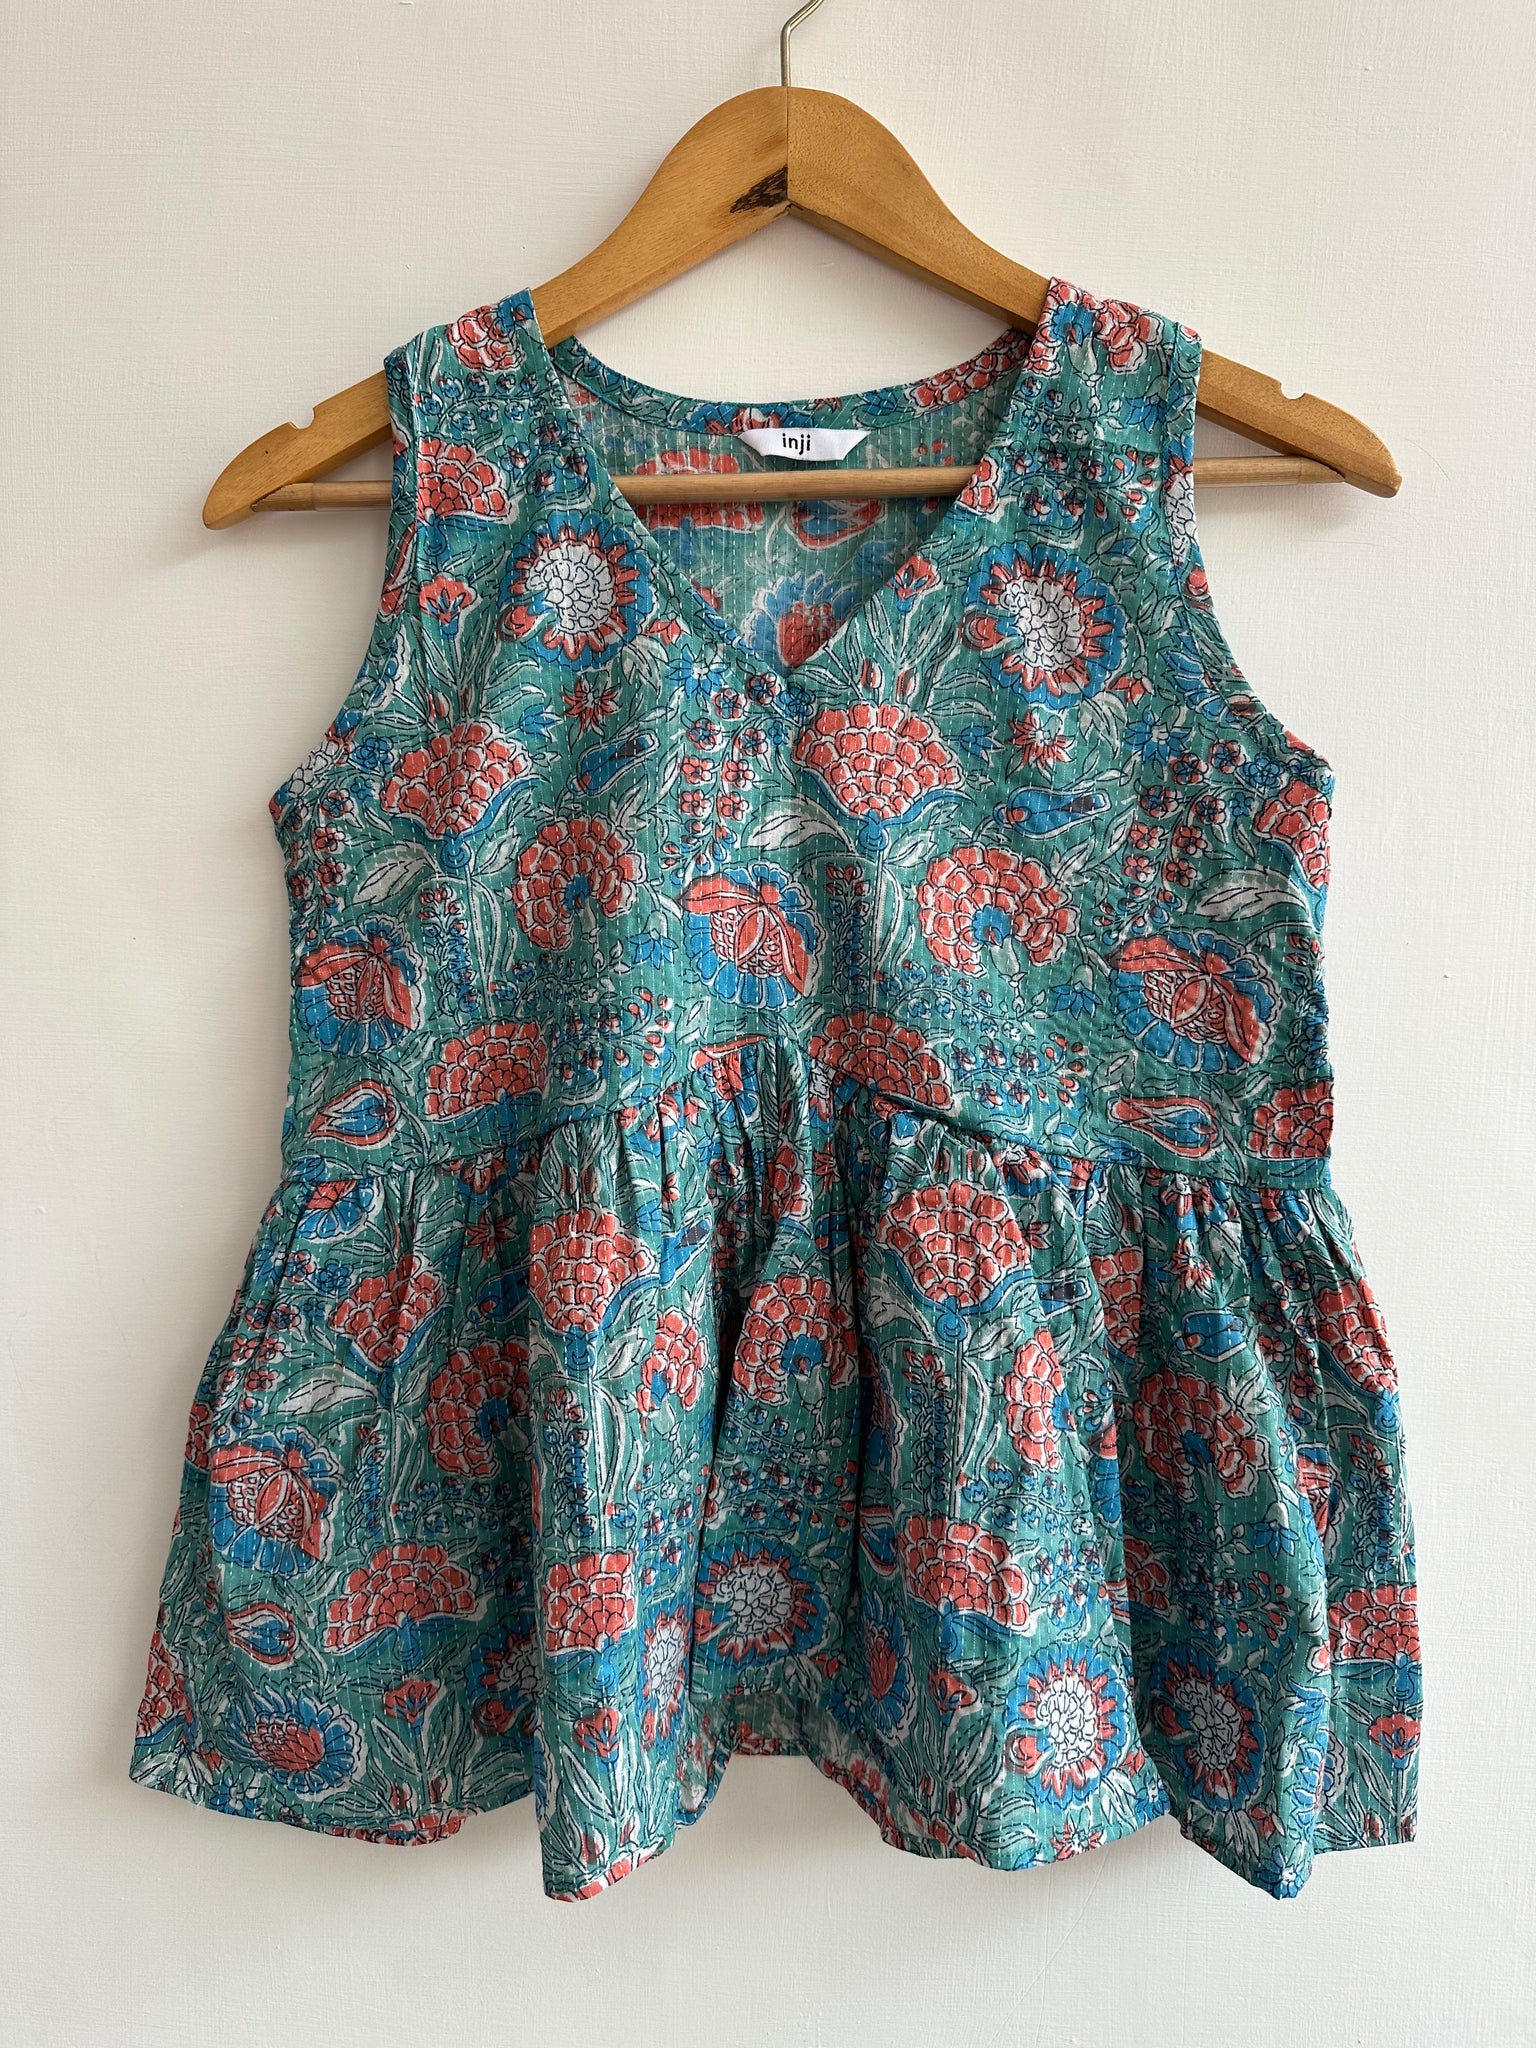 Sleeveless Top in kantha fabric